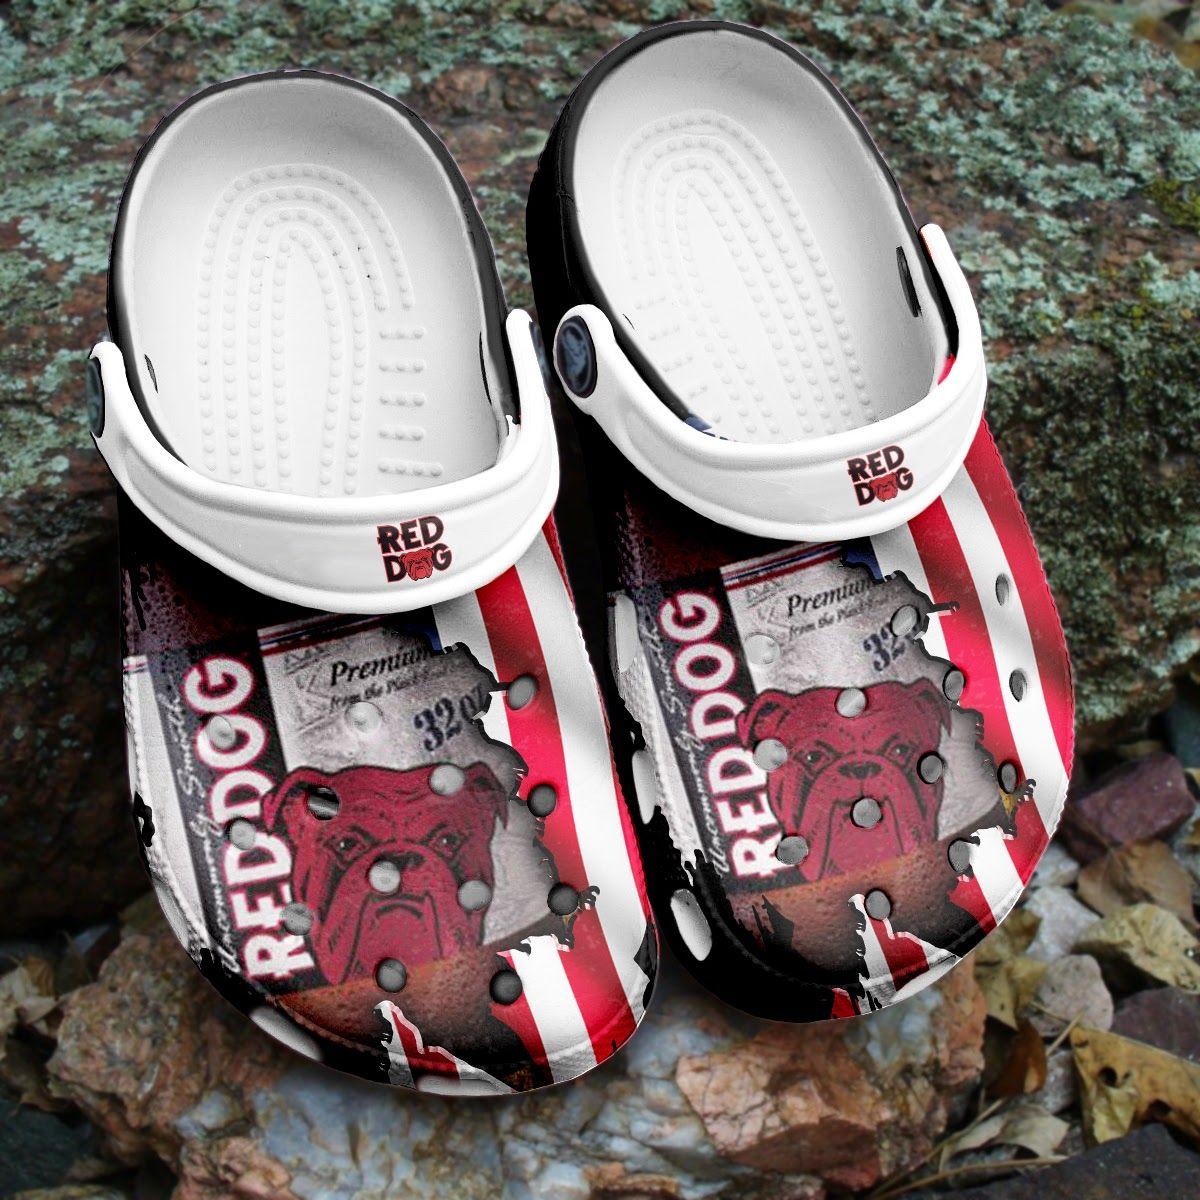 If you'd like to purchase a pair of Crocband Clogs, be sure to check out the official website. 99